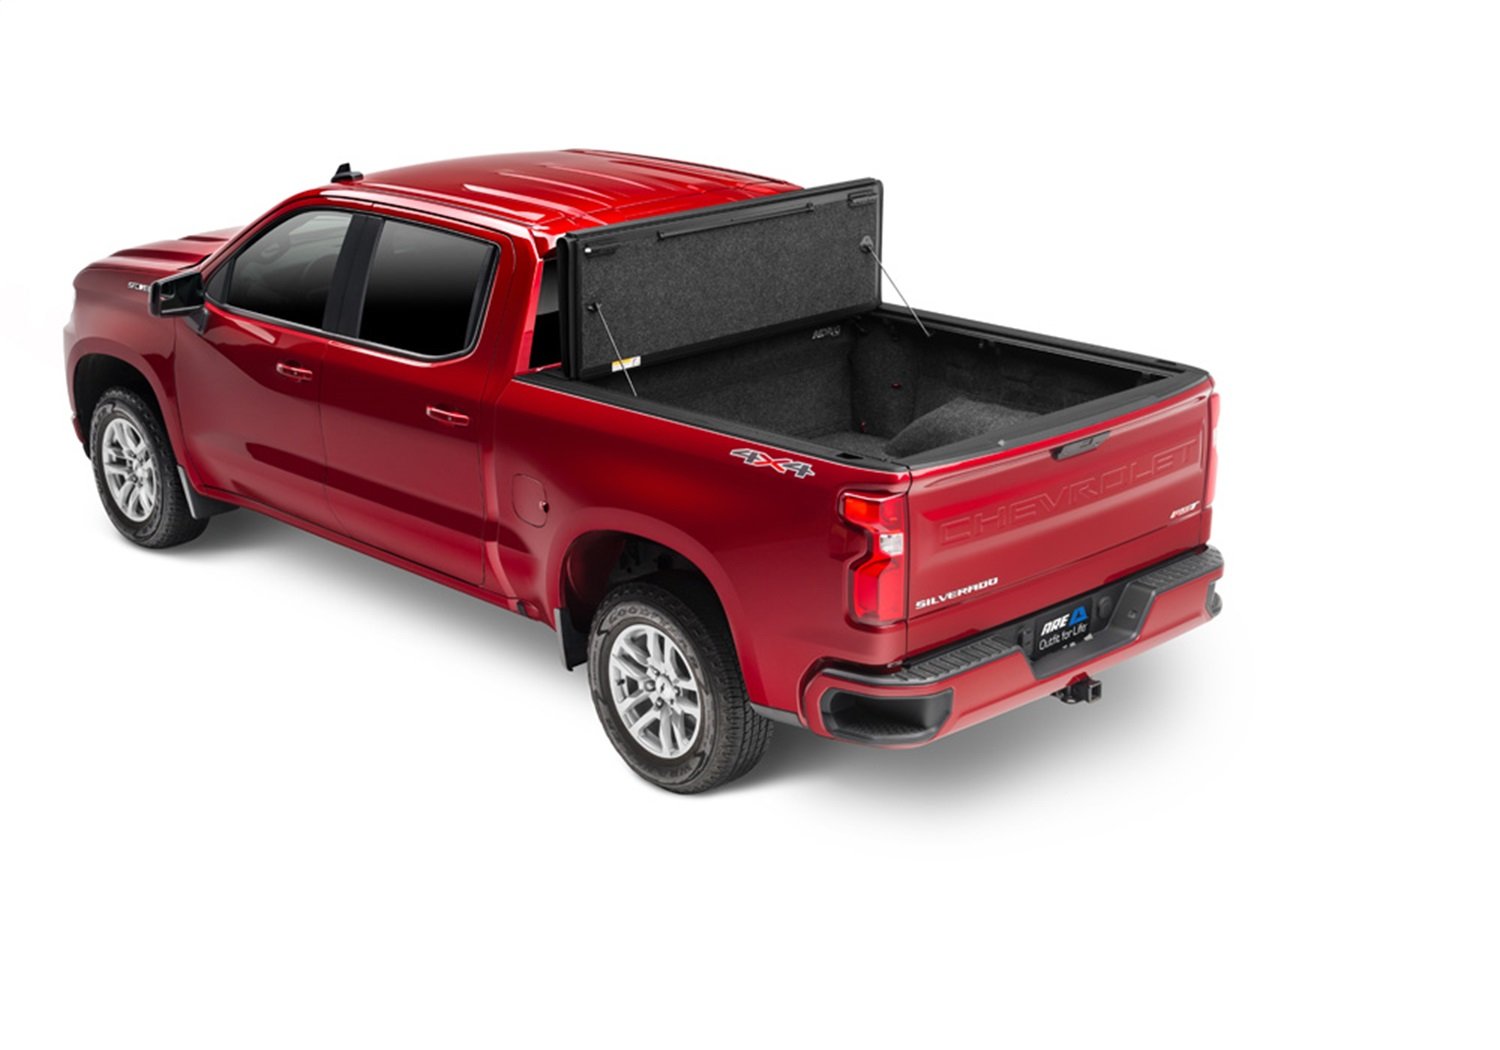 Fusion Tonneau Cover Fits Select Ford F-150 [Bed: 6 ft. 6 in.]